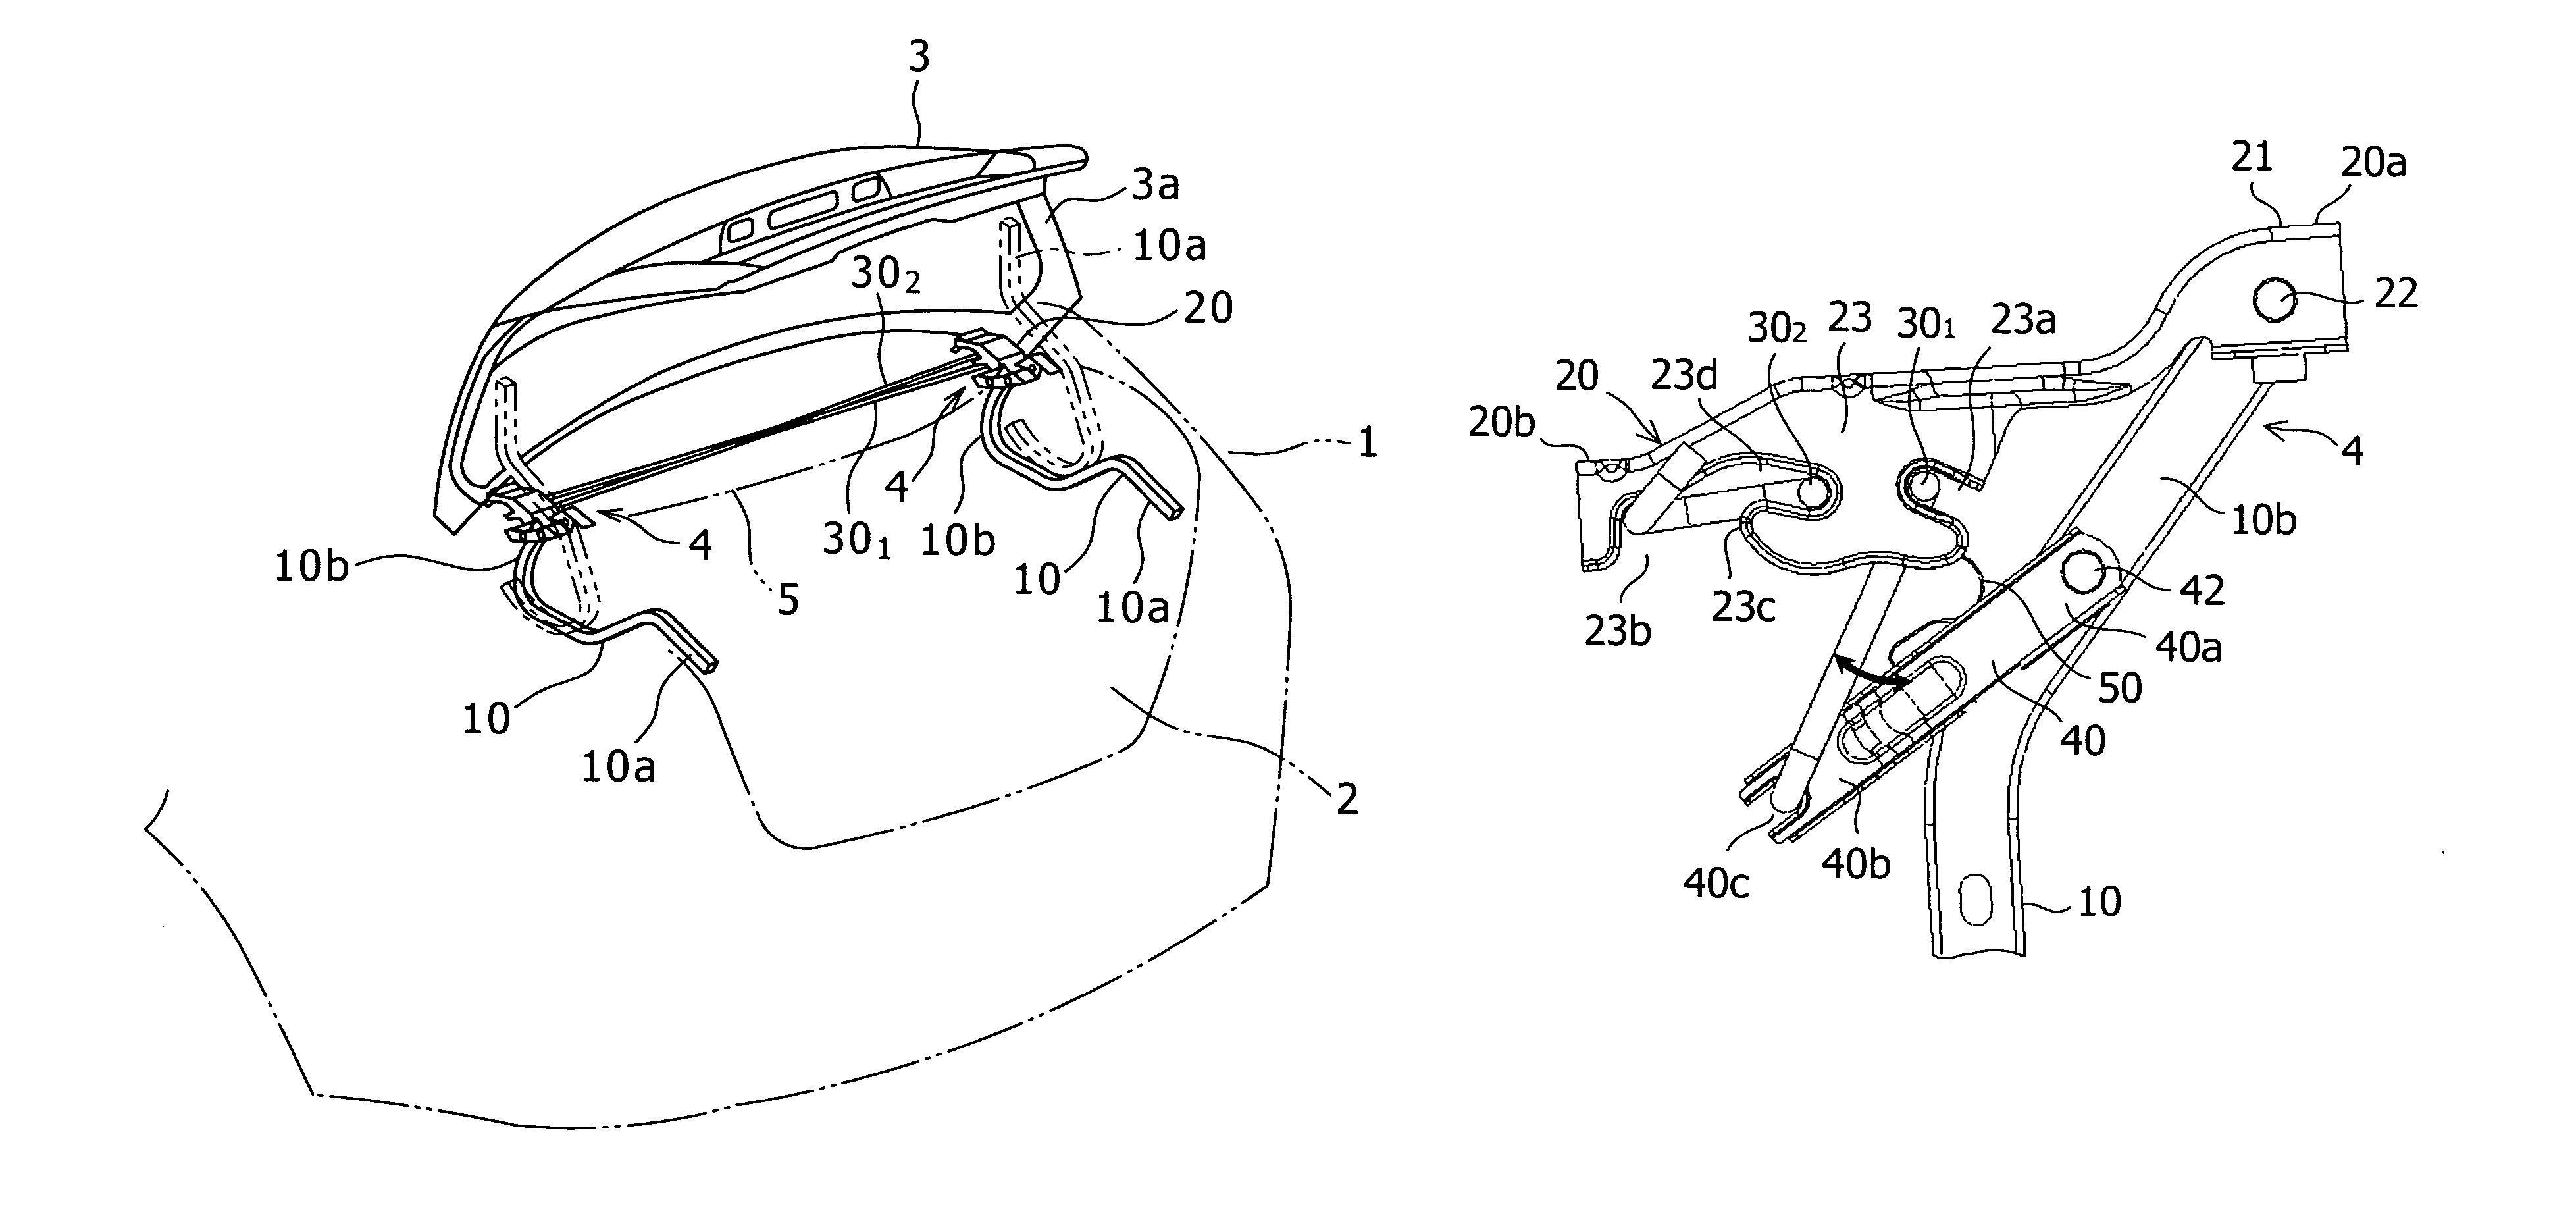 Opening and closing device for automobile trunk lid